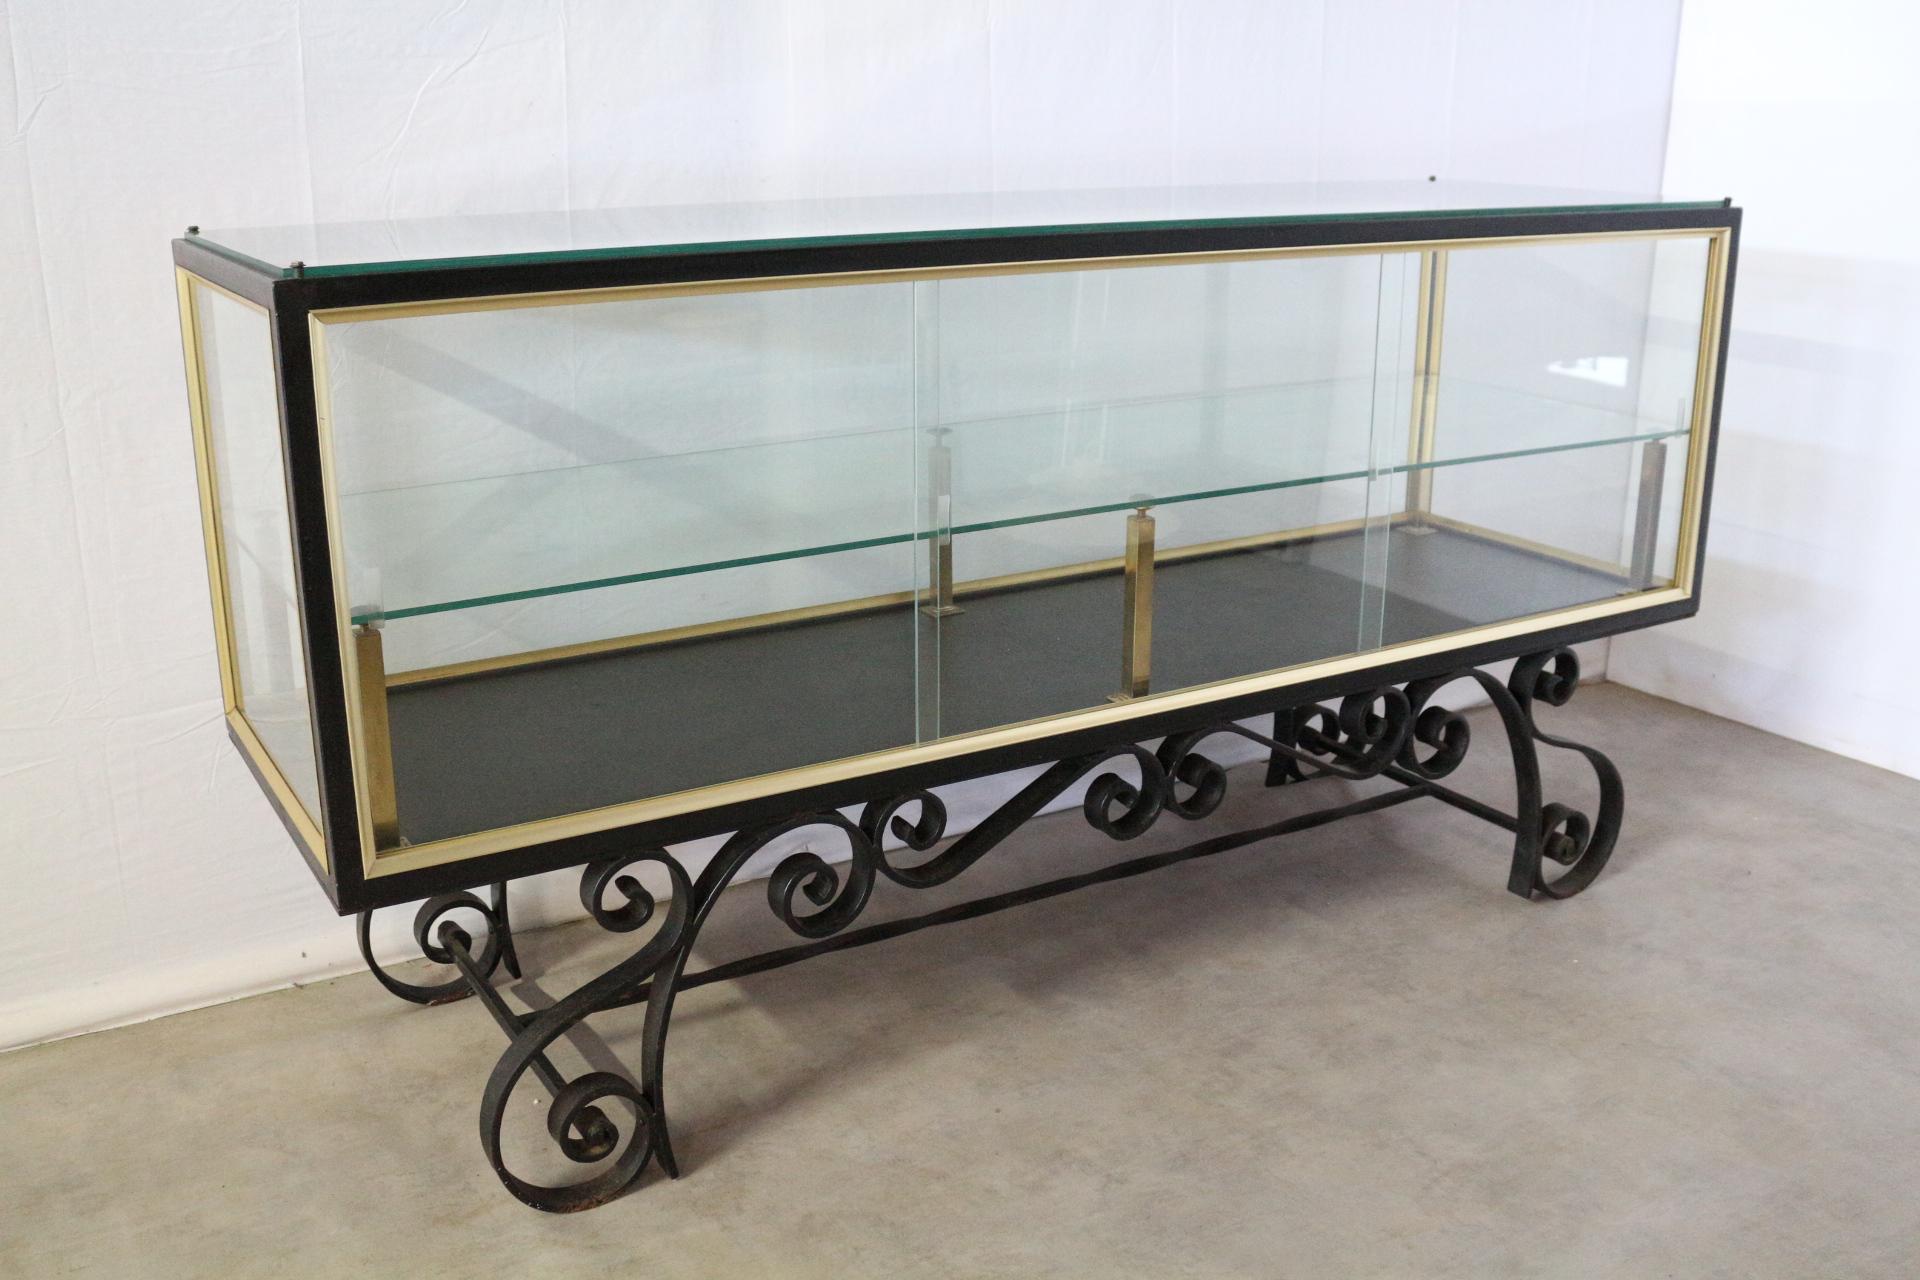 Midcentury French shop counter vitrine display cabinet glass wrought iron, circa 1960
Unusual and decorative
Glass central shelf
Very good vintage condition for its age.
  